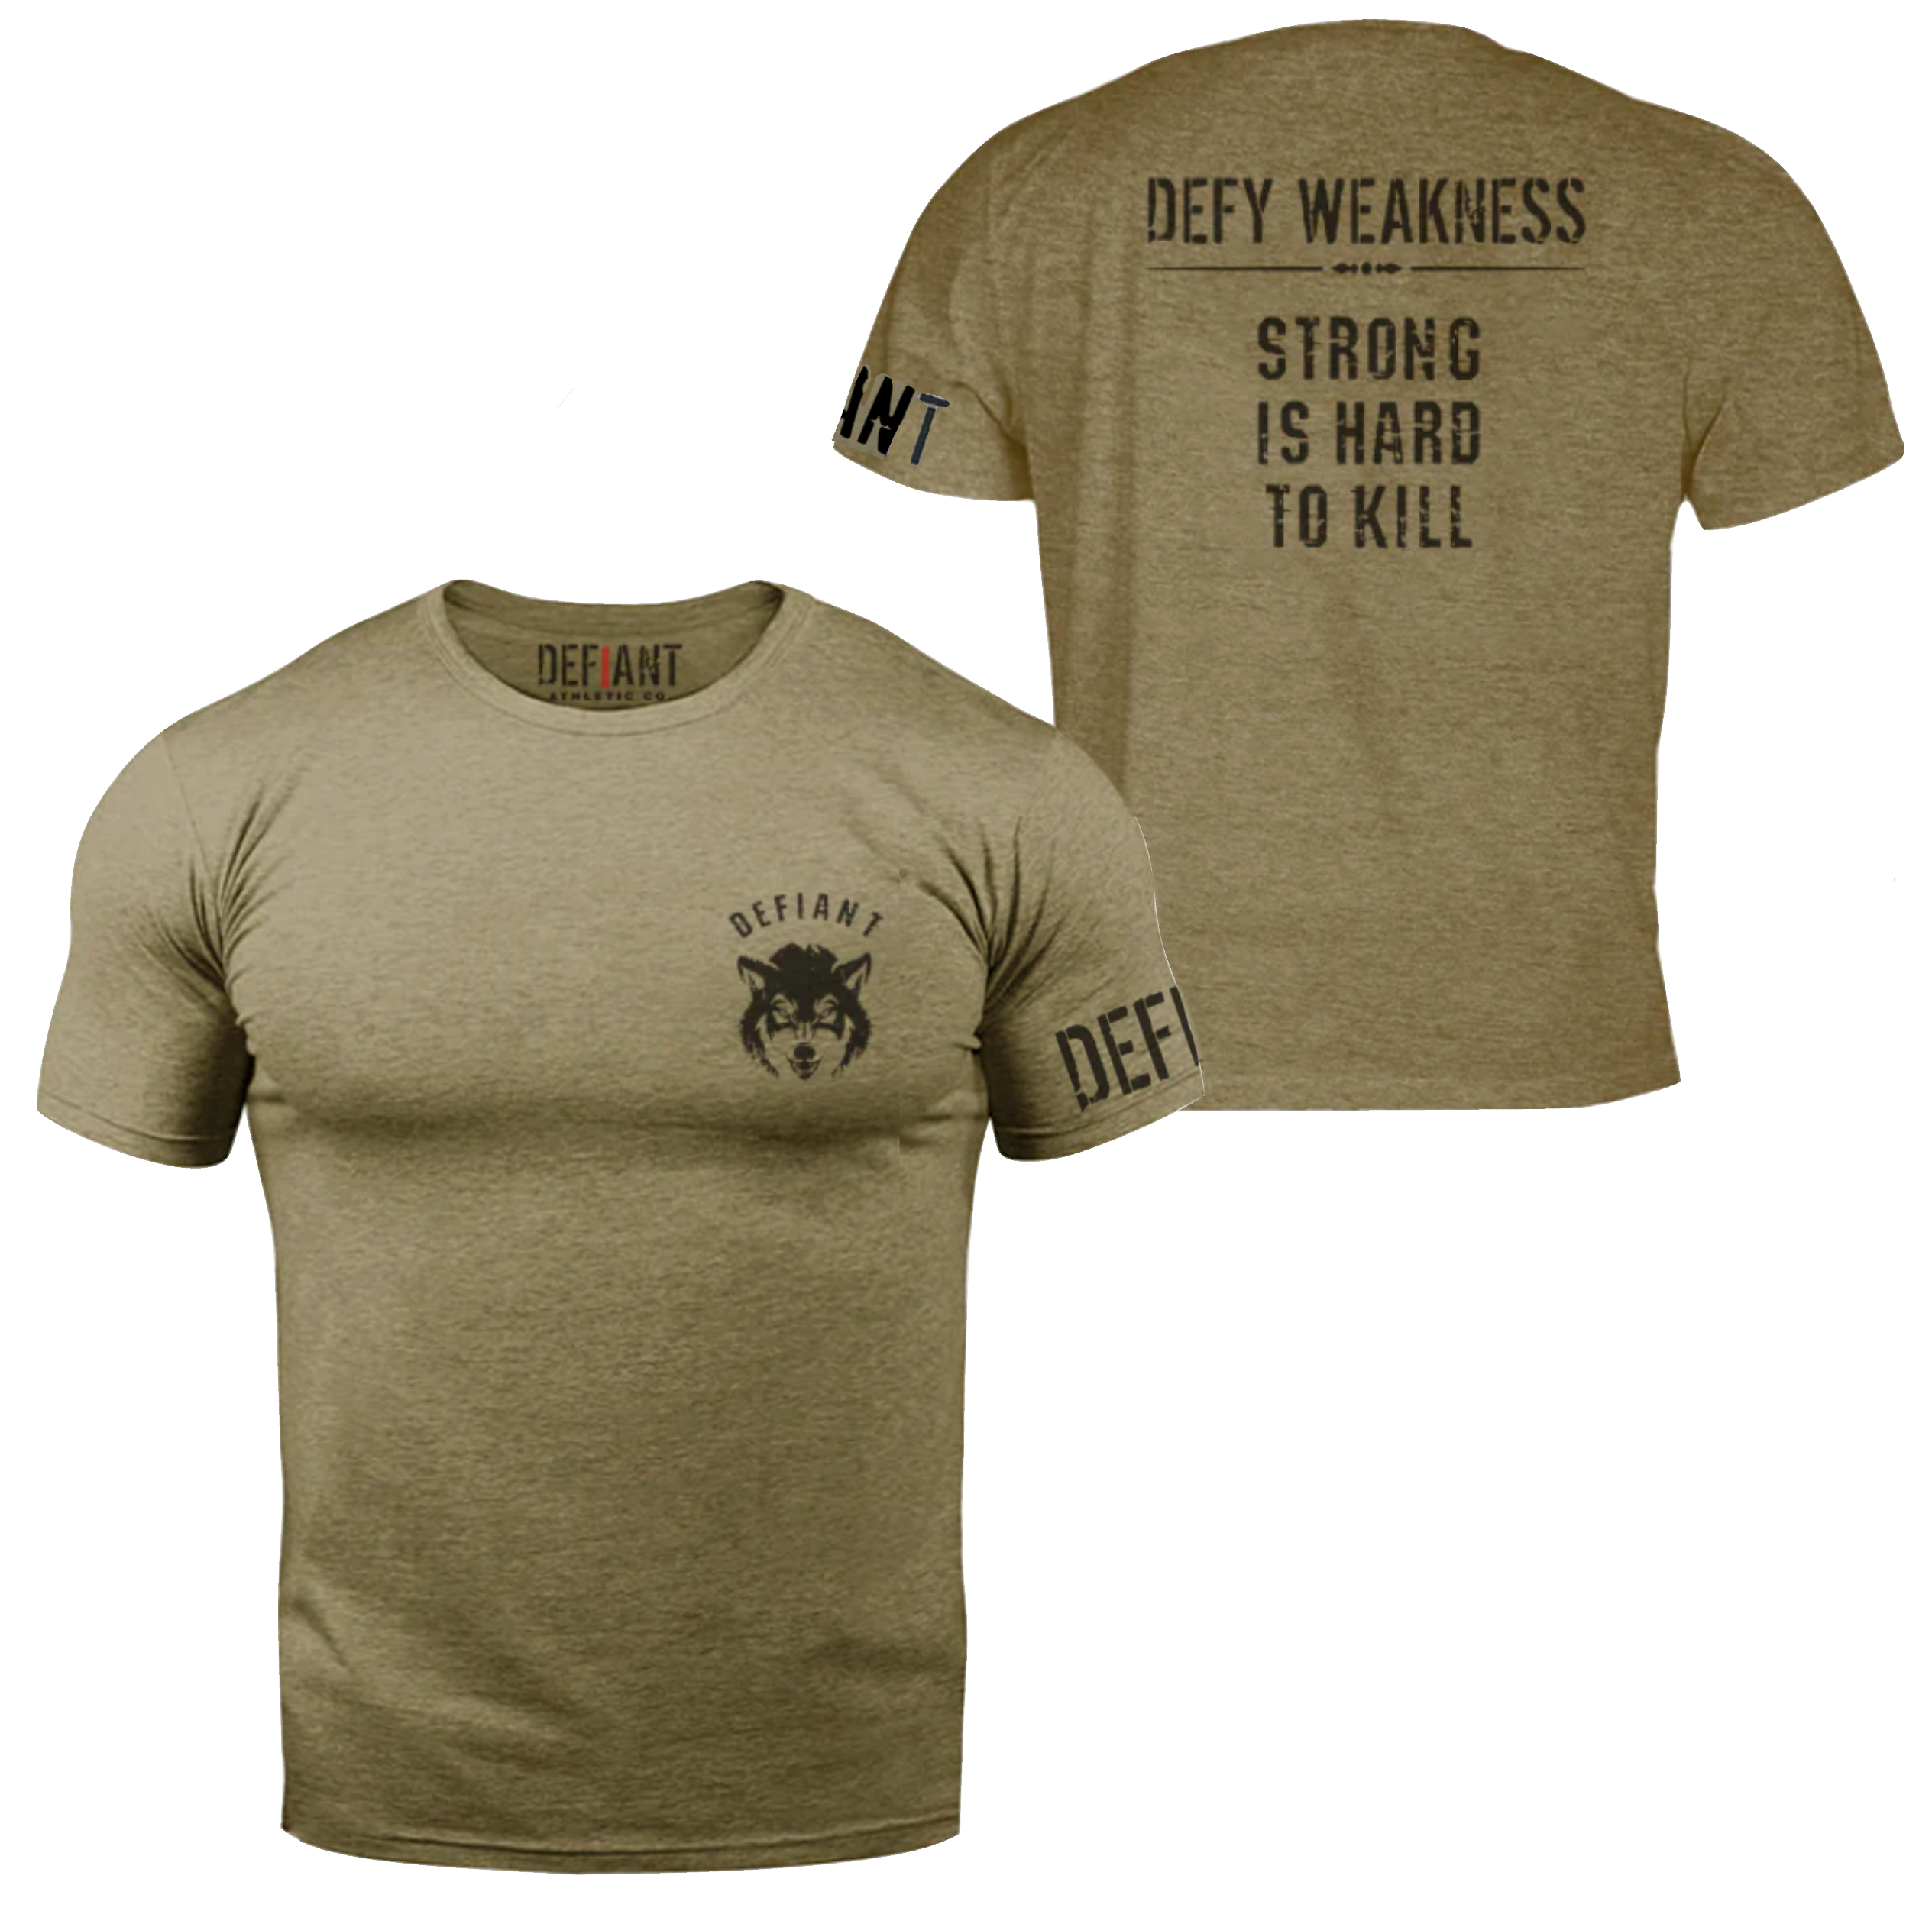 DEFY WEAKNESS - STRONG IS HARD TO KILL